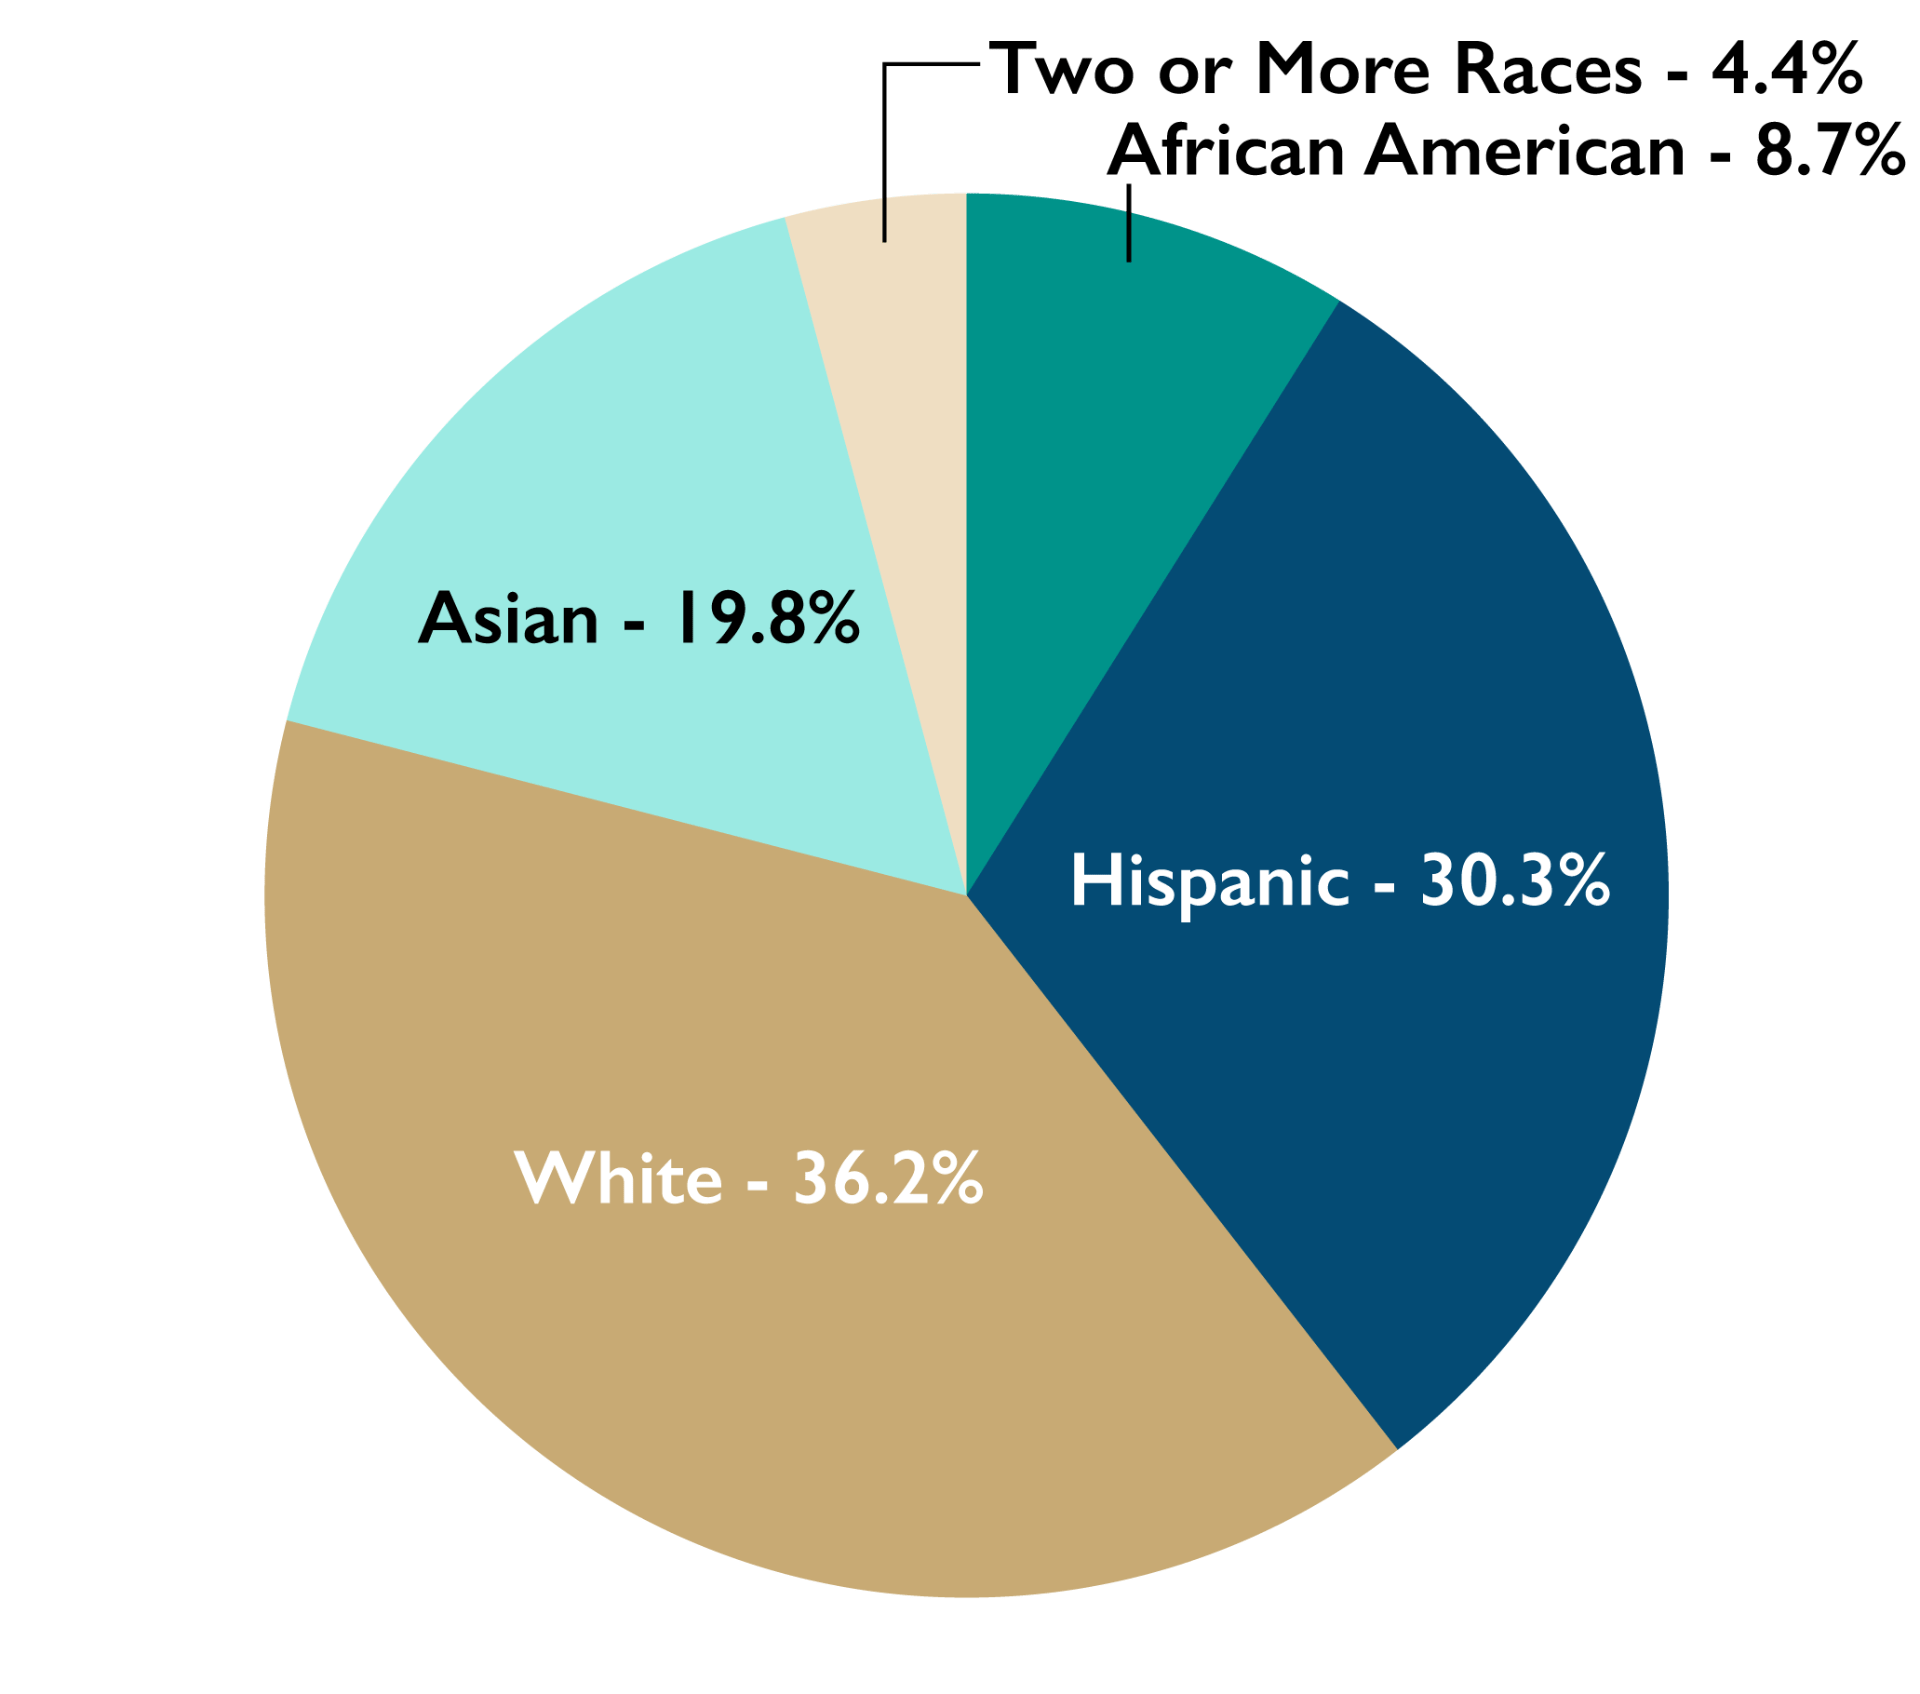 Ethnicity Pie Chart - African American 8.7%, Hispanic 30.3%, White 36.2%, Asian 19.8%, Two or more races 4.4%